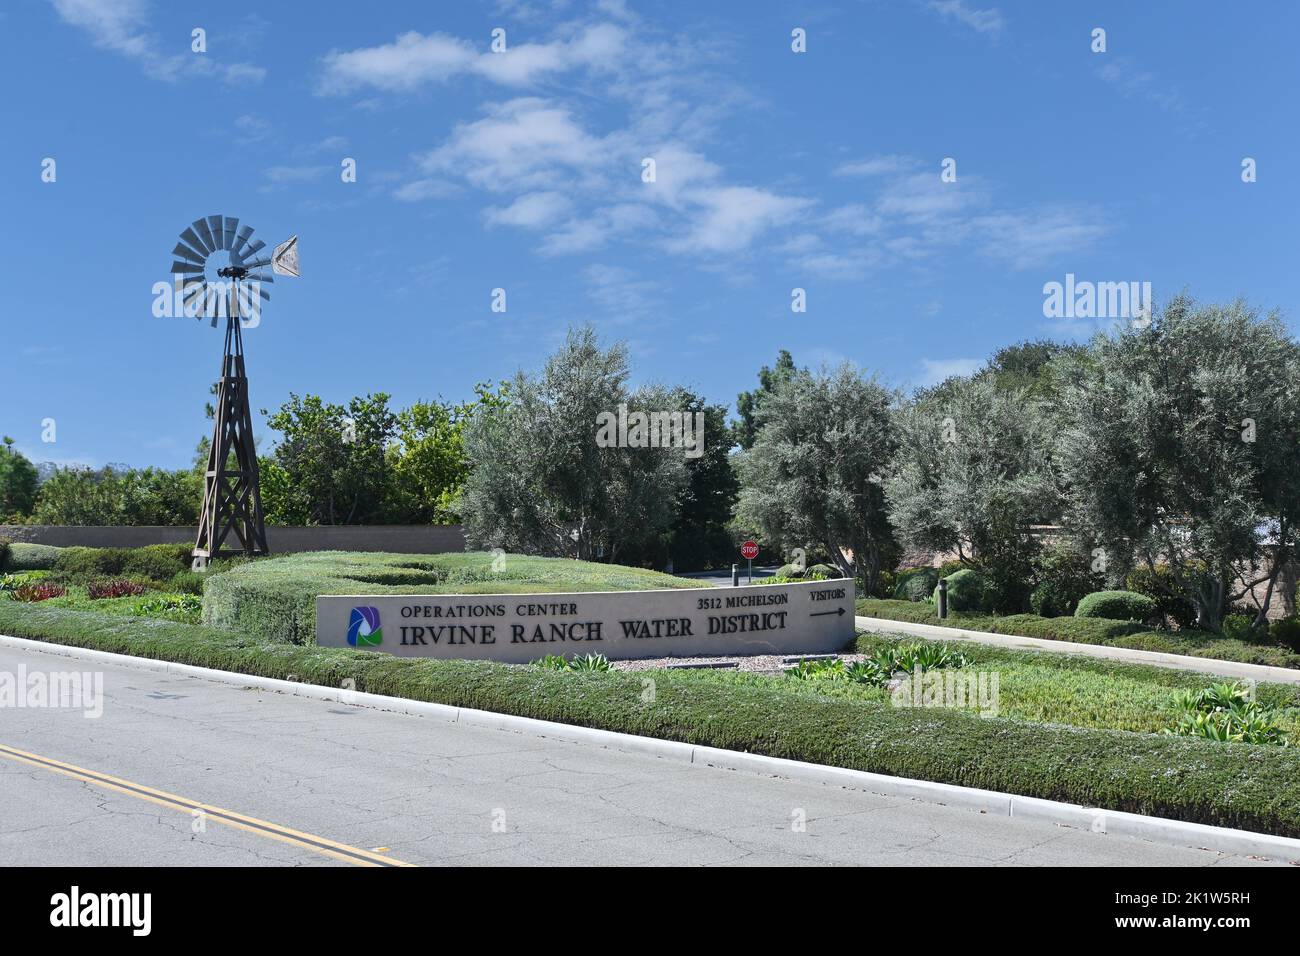 IRVINE, CALIFORNIA - 09 SEPT 2022: Windmill and sign for the Irvine Ranch Water District Operations Center. Stock Photo